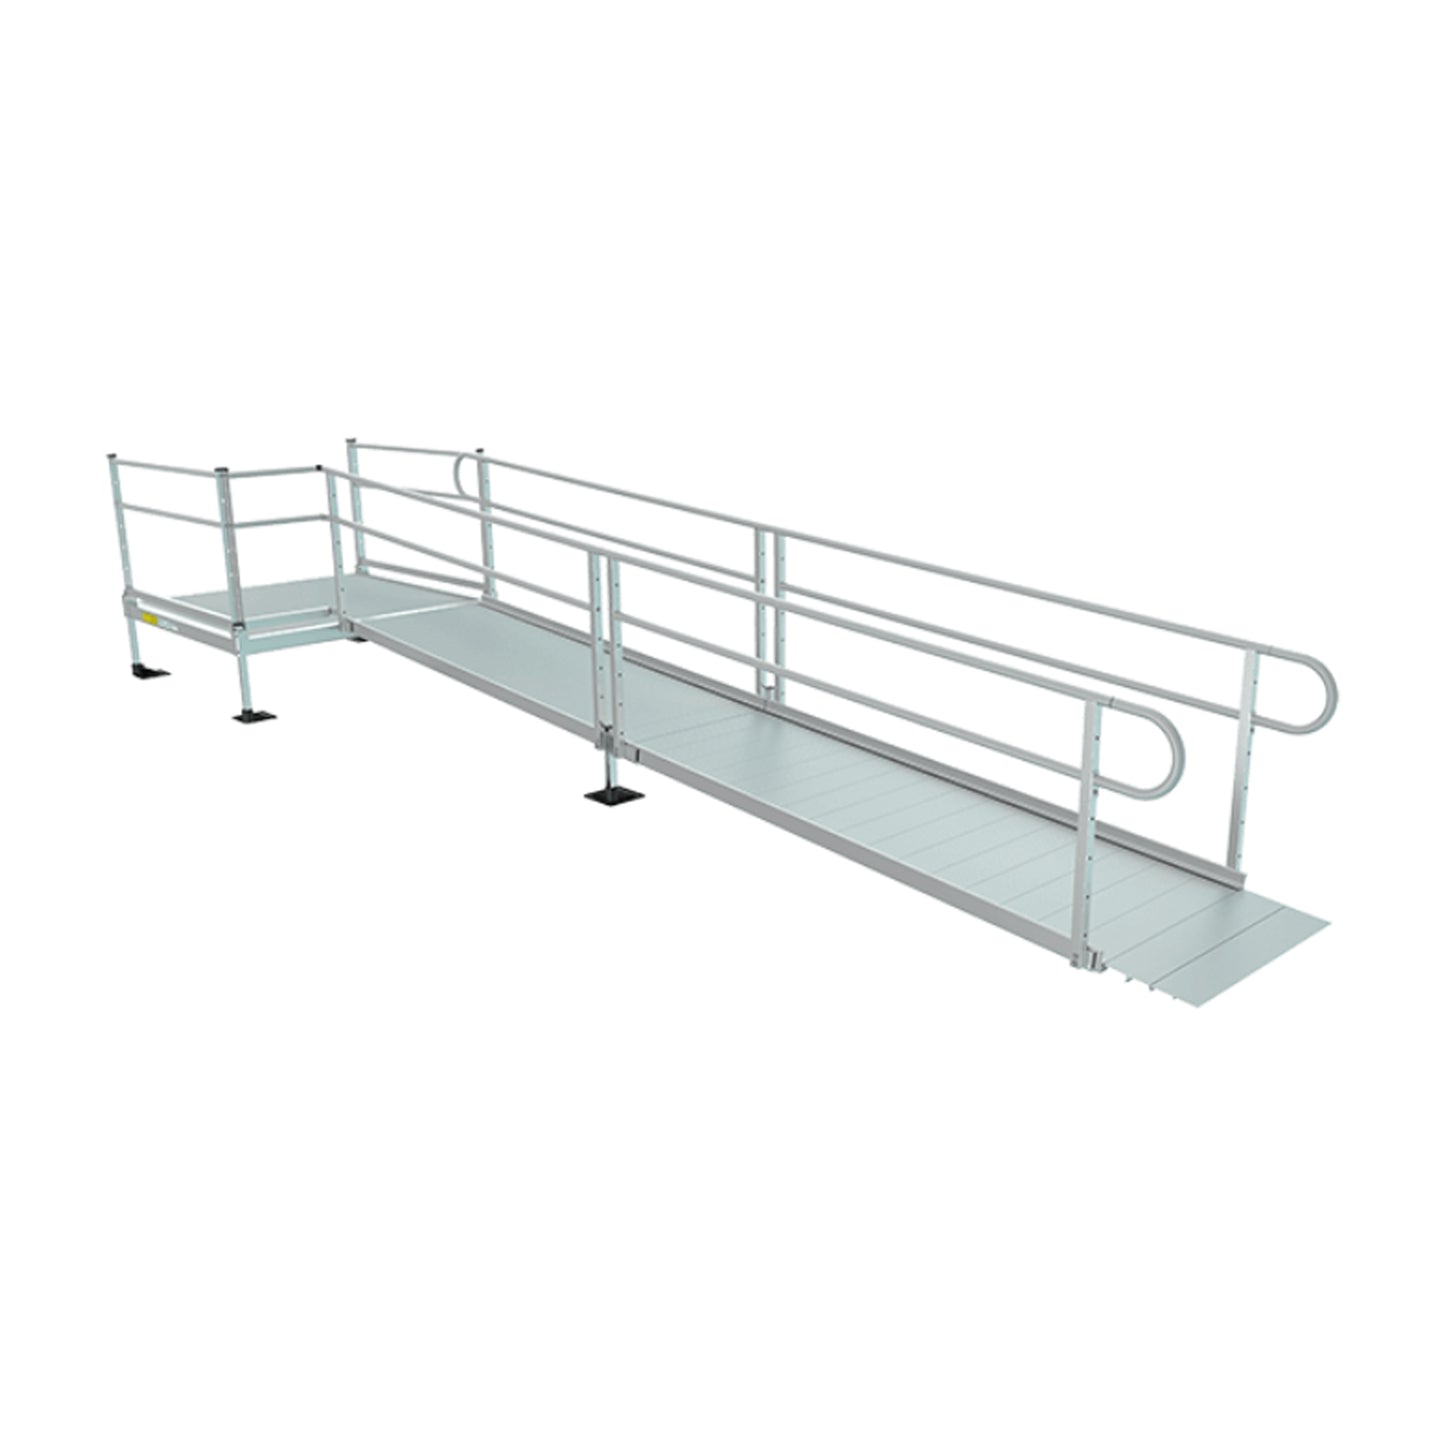 NPS 24" ADA Ramp for stage, 24' with 5x8 platform (National Public Seating NPS-CH011124B)